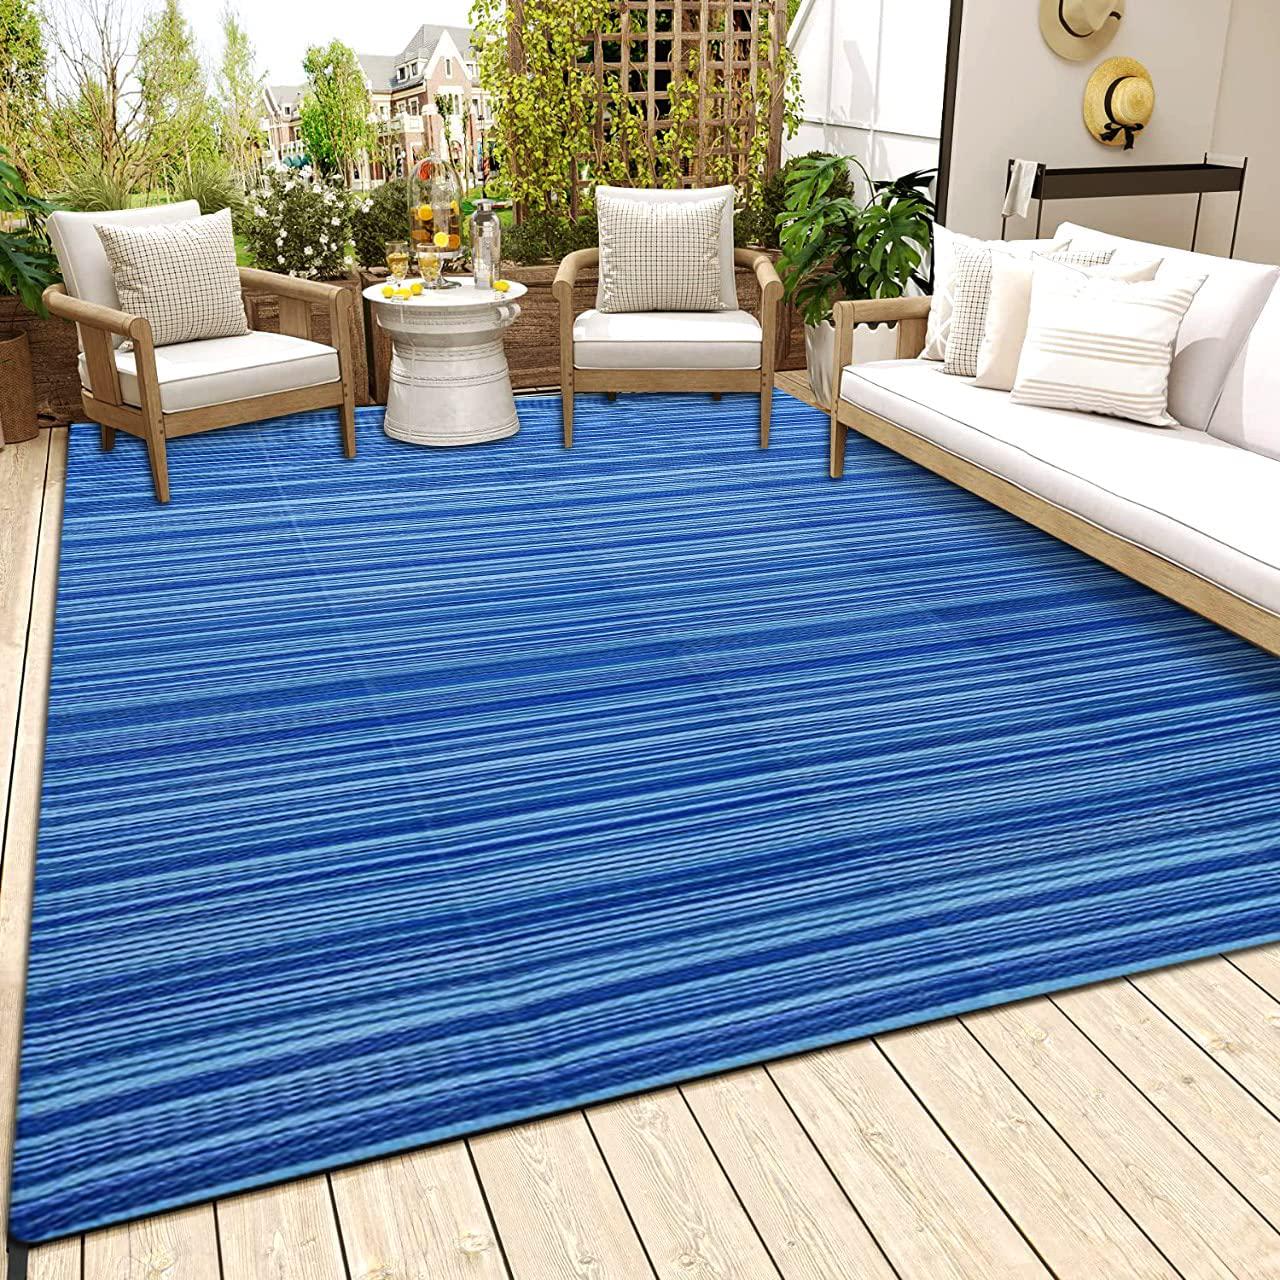 NAQSH Outdoor Indoor Plastic Rug - Foldable Reversible Outdoors Waterproof and Washable Patios Garden Decor, Size (3x5 Feet, Striped Blue)-